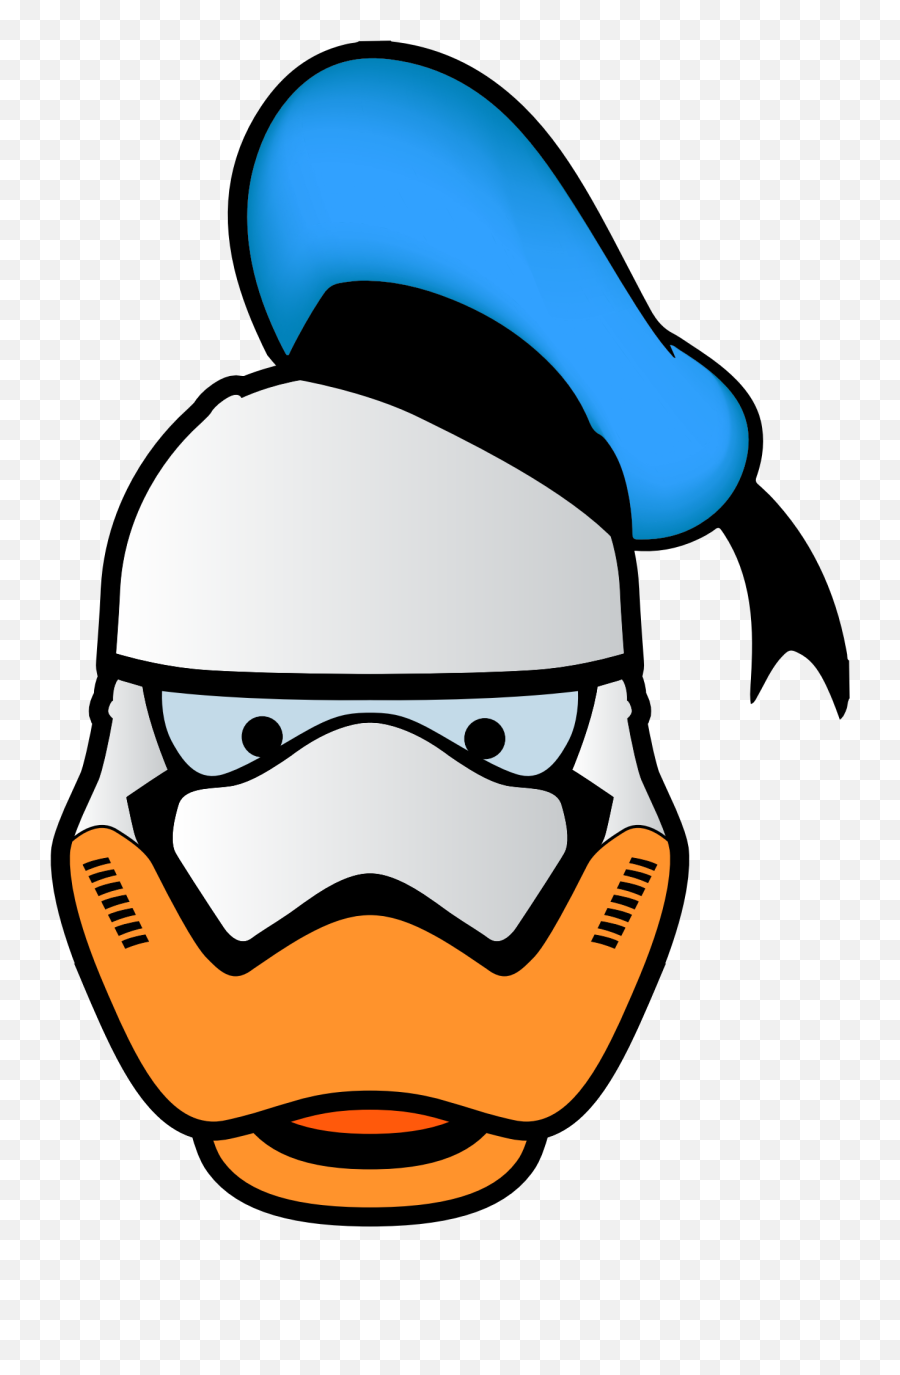 Free Picture Famous Cartoon Character Computer Graphic - Famous Cartoon Character Faces Emoji,Duck Face Emoji